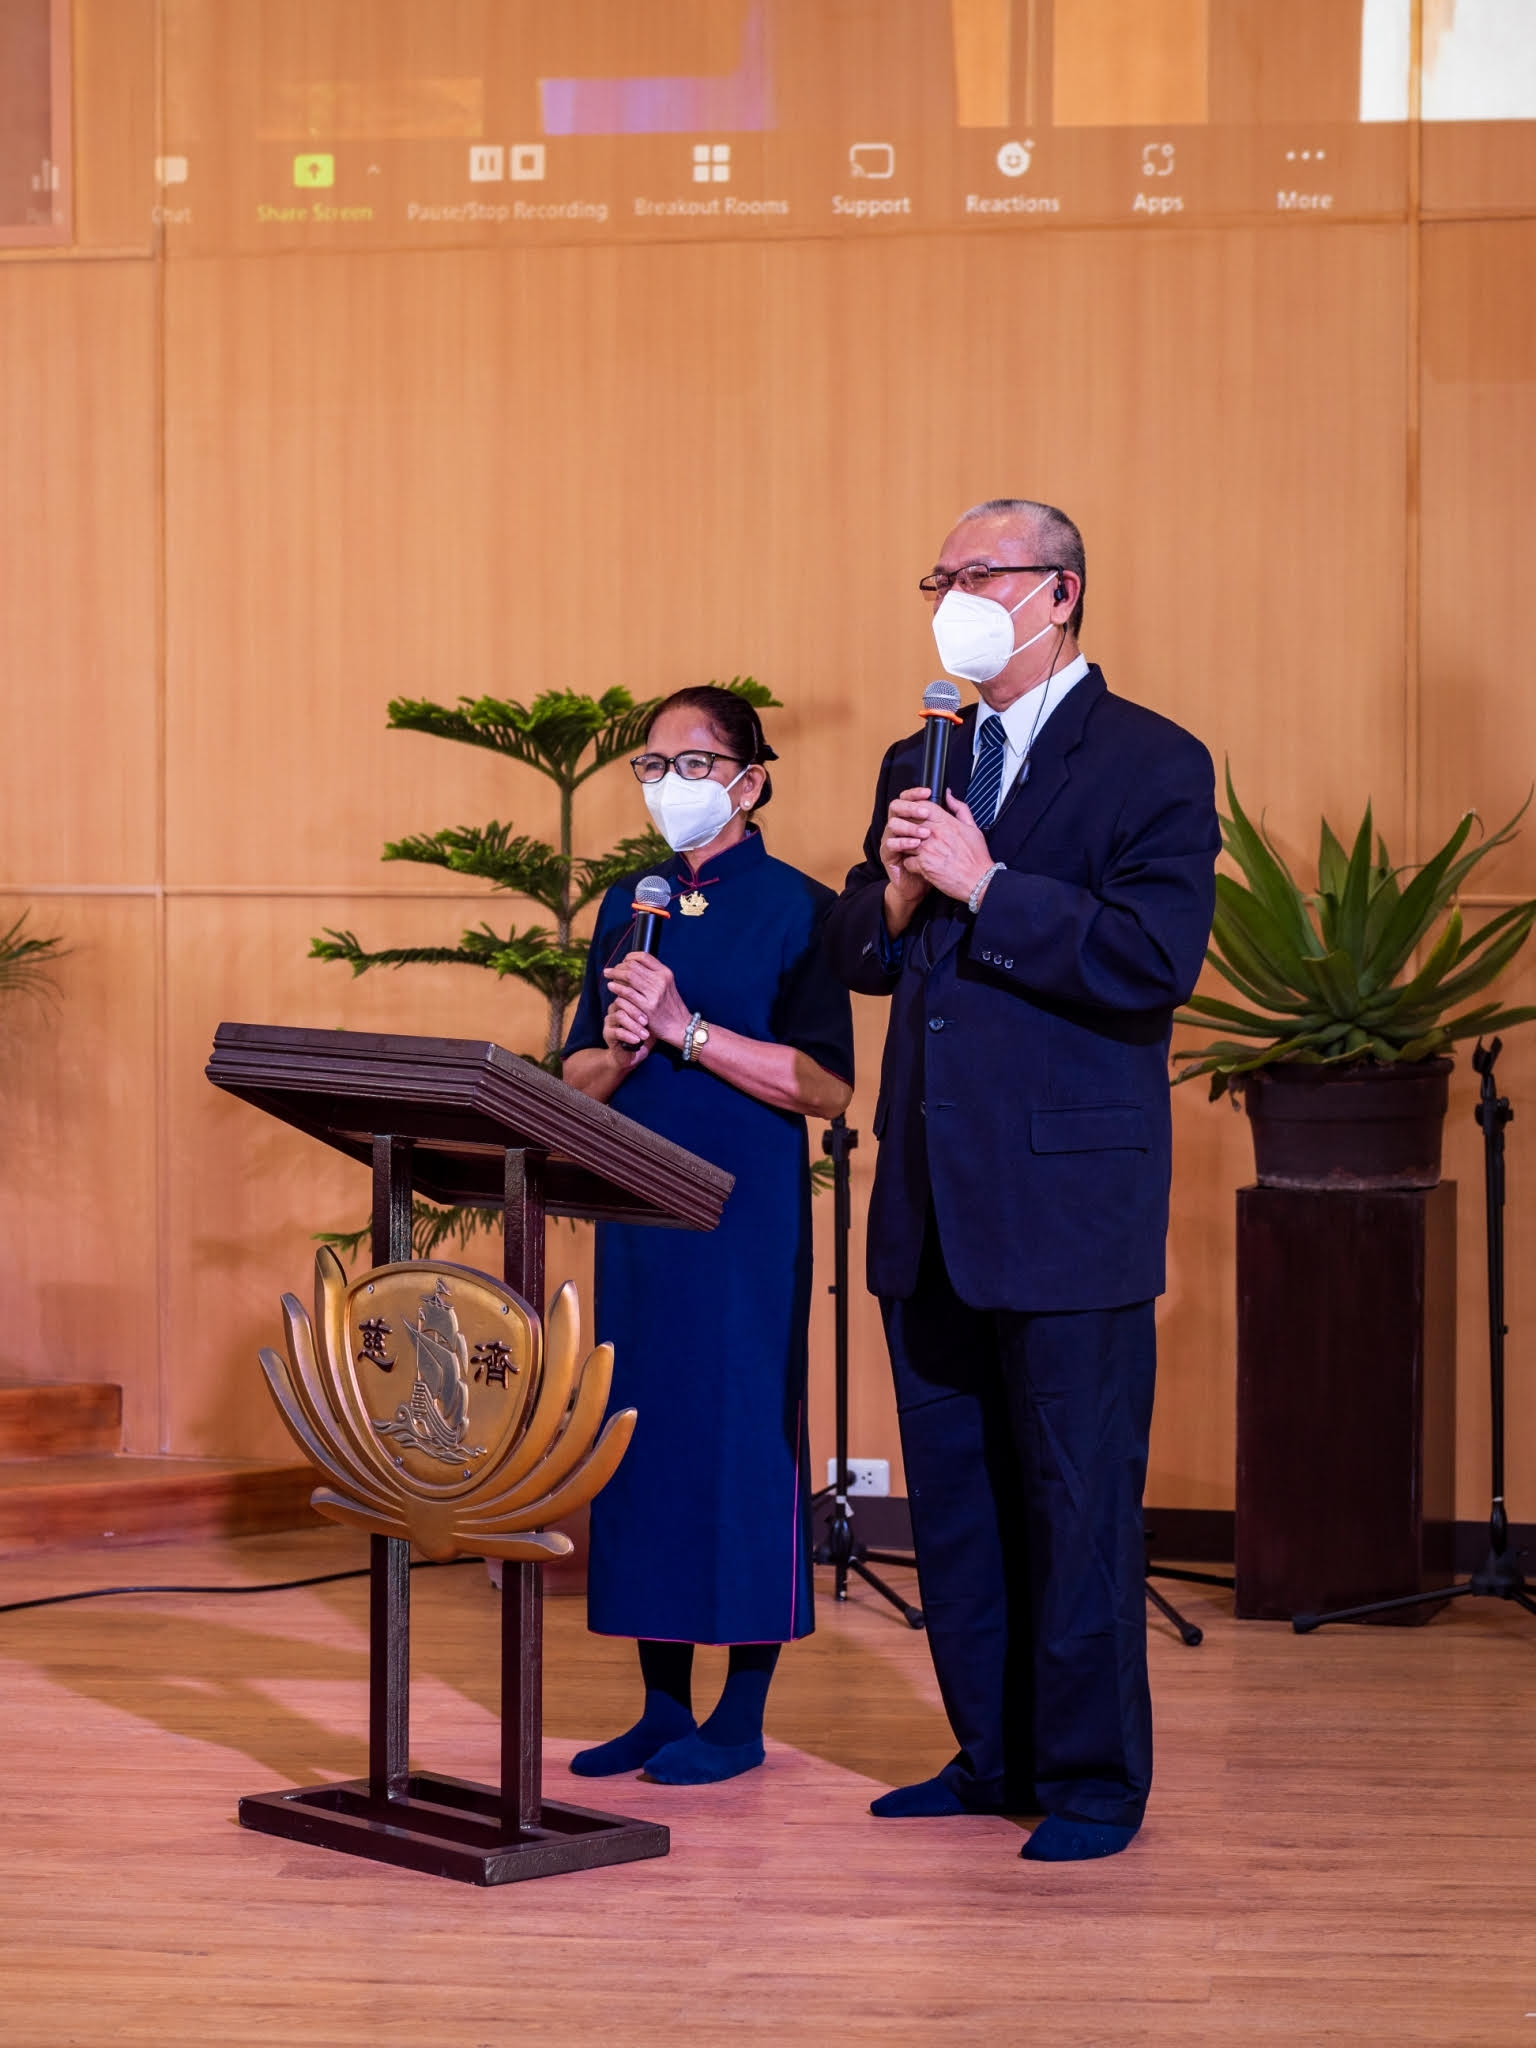 Tzu Chi volunteers Espie Sapin (left) and Lino Sy served as the blessing ceremony’s emcees. 【Photo by Daniel Lazar】